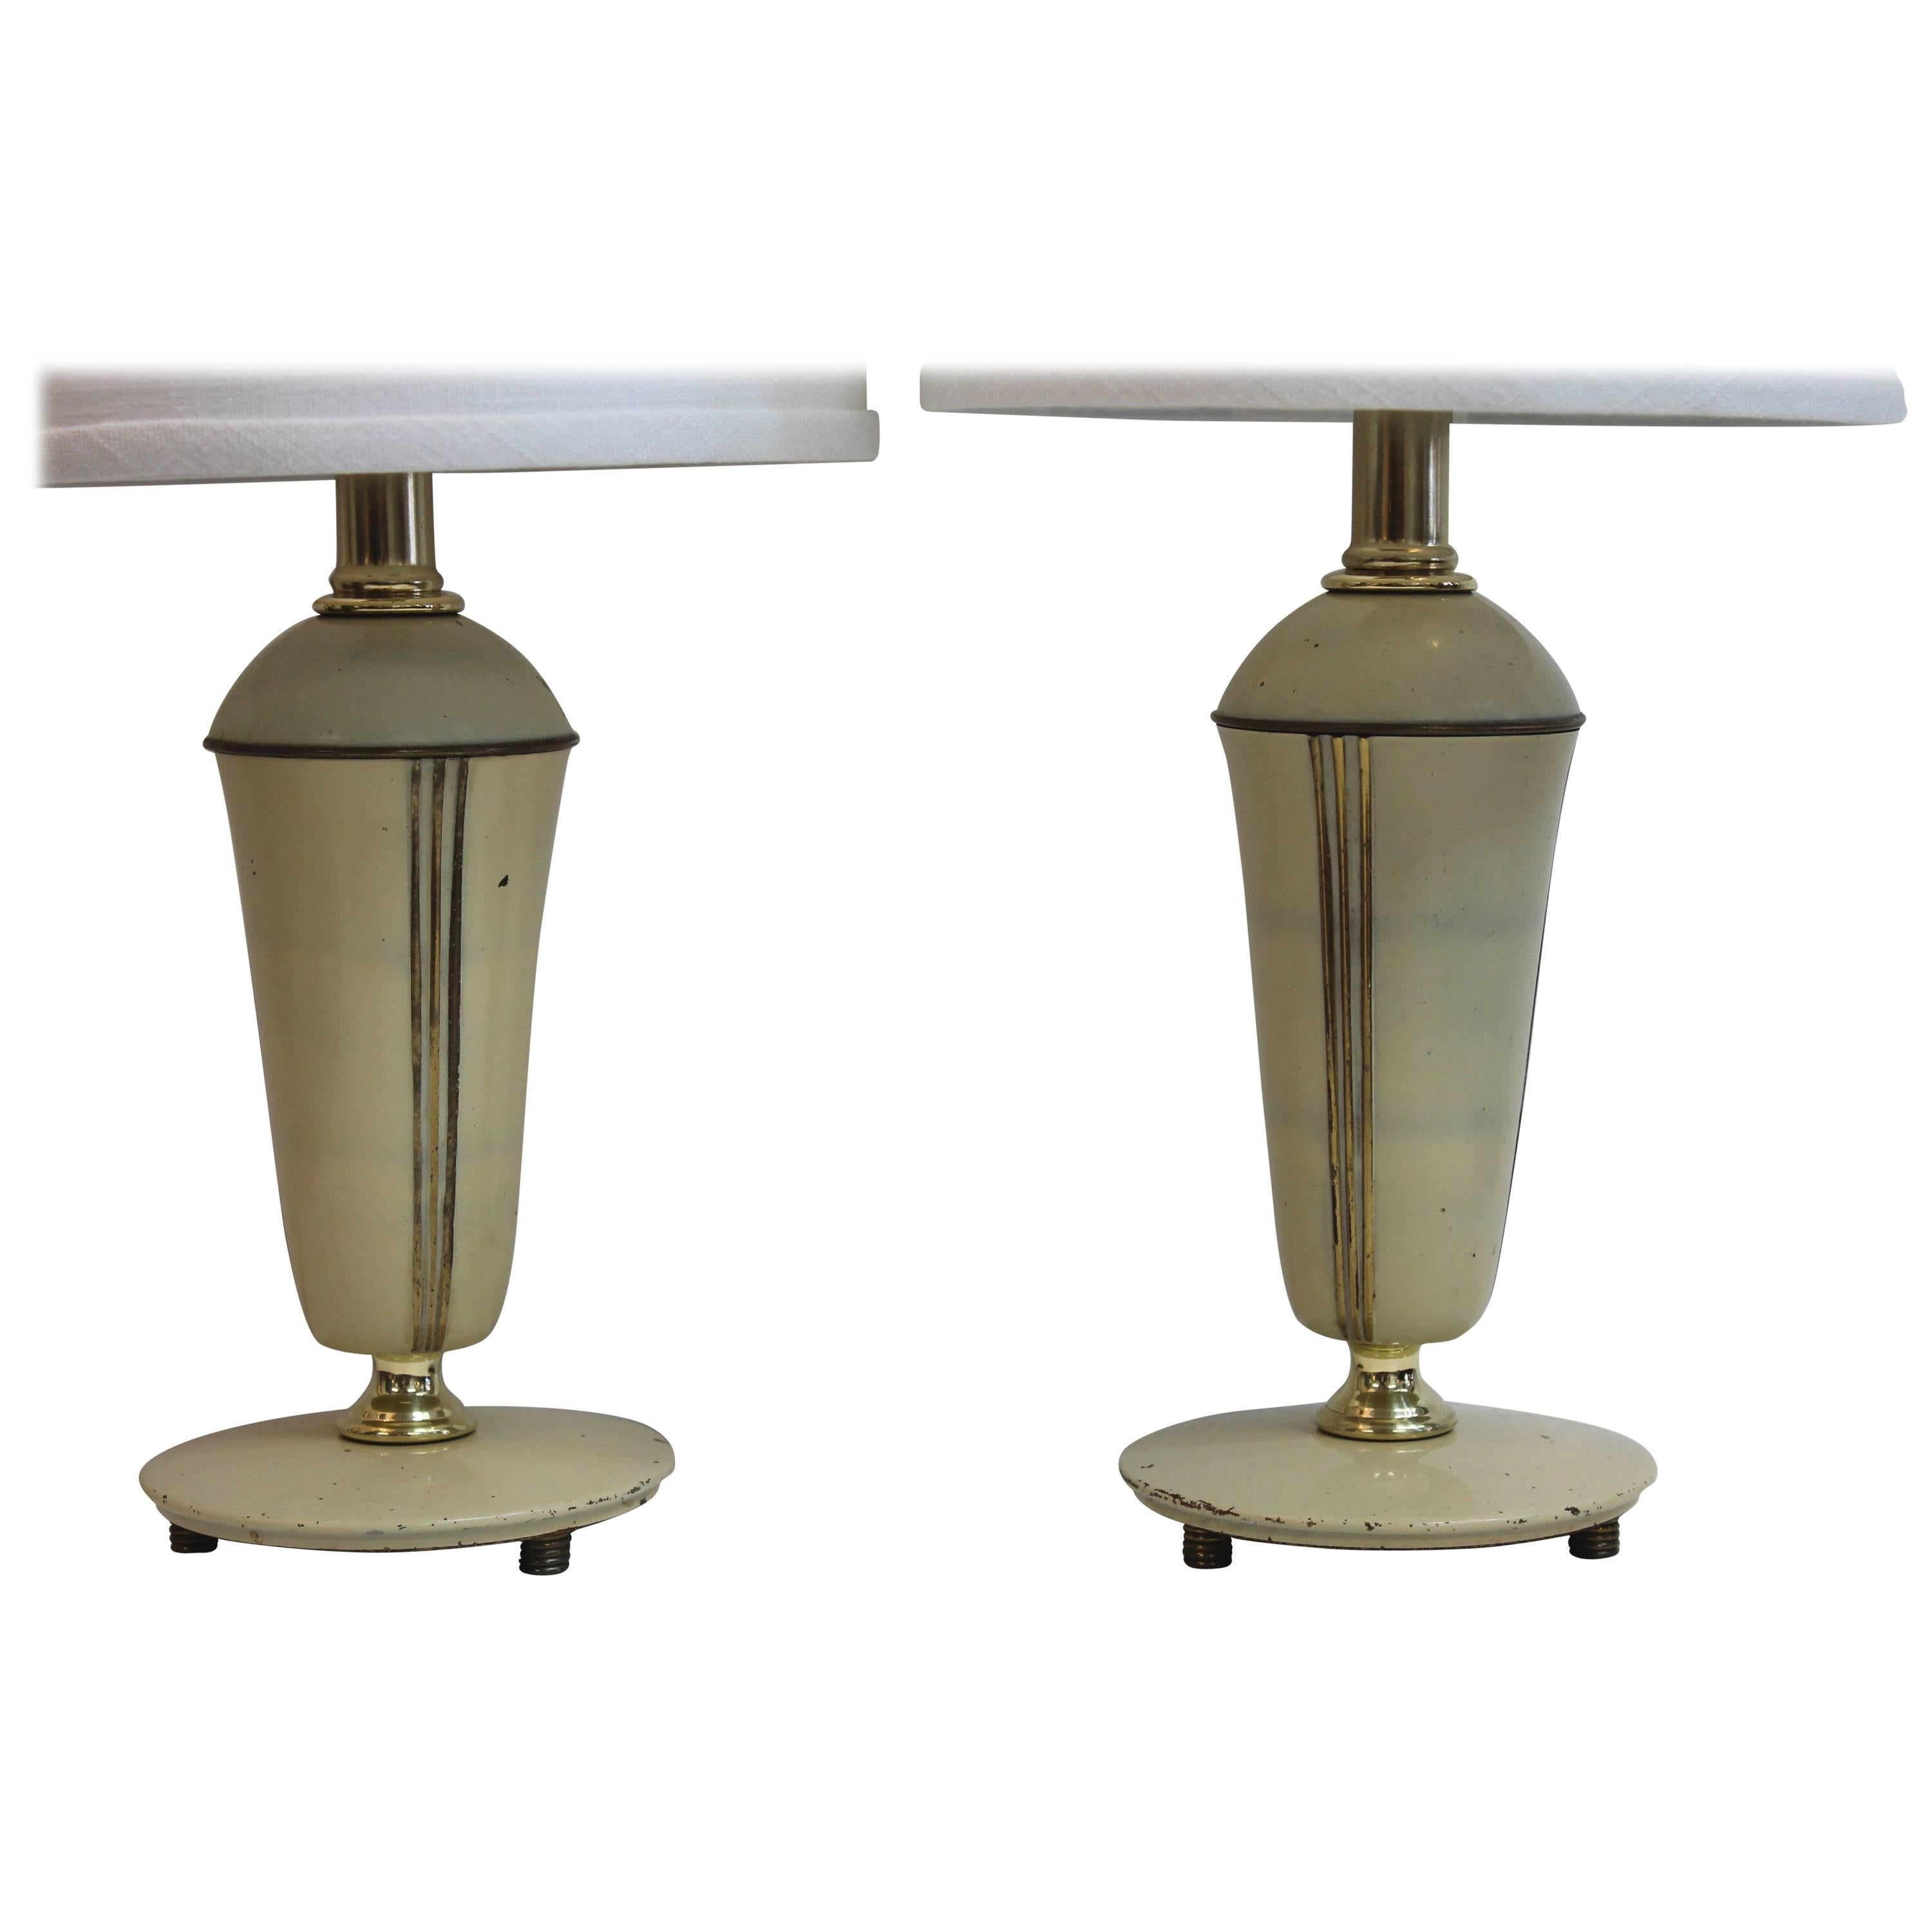 Pair of Chase Boudoir Lamps